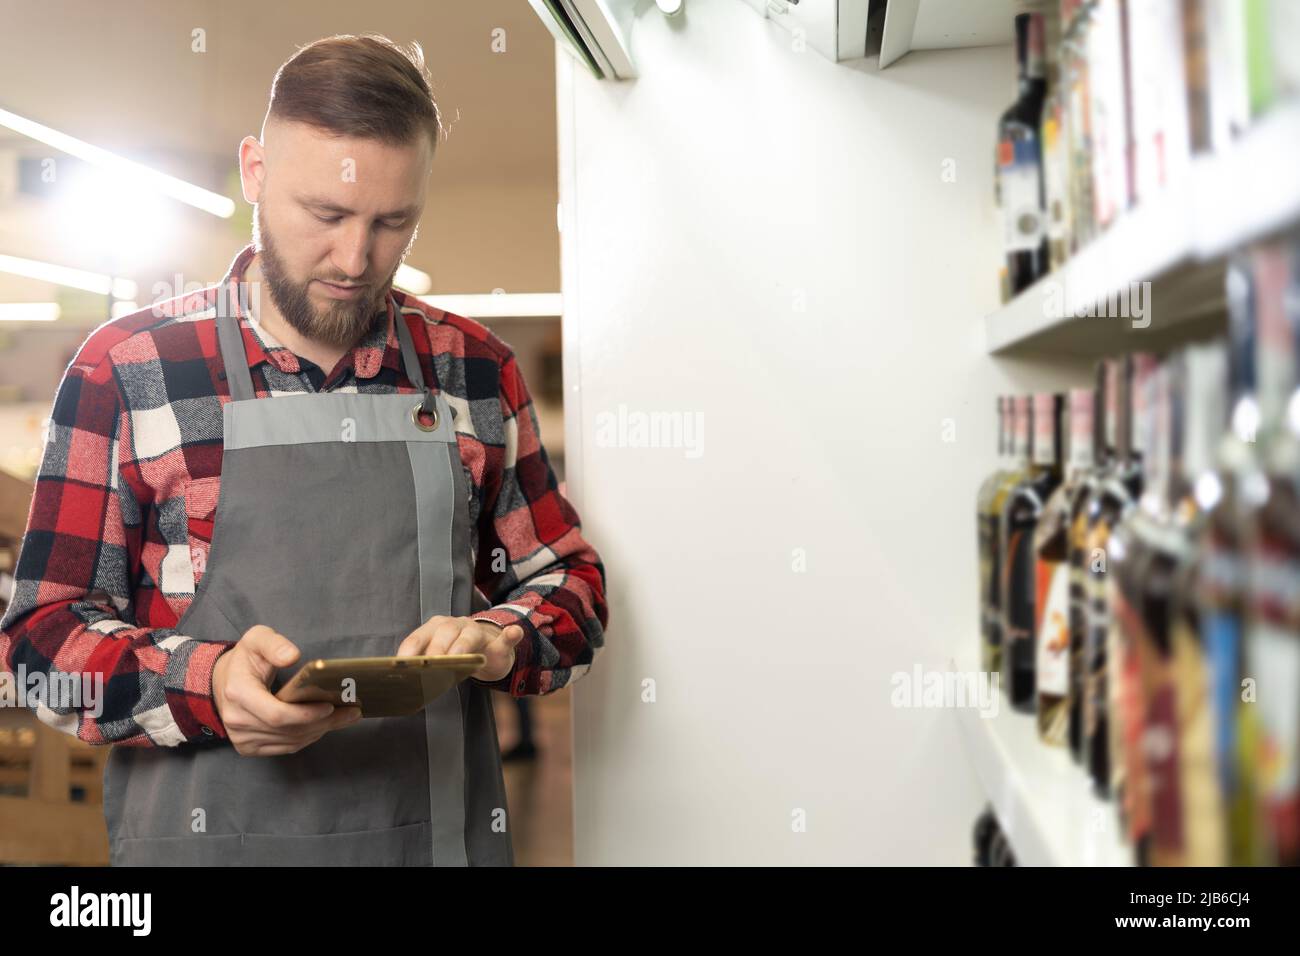 supermarket worker using digital tablet, grocery store employee orders groceries online, innovative technology and work Stock Photo